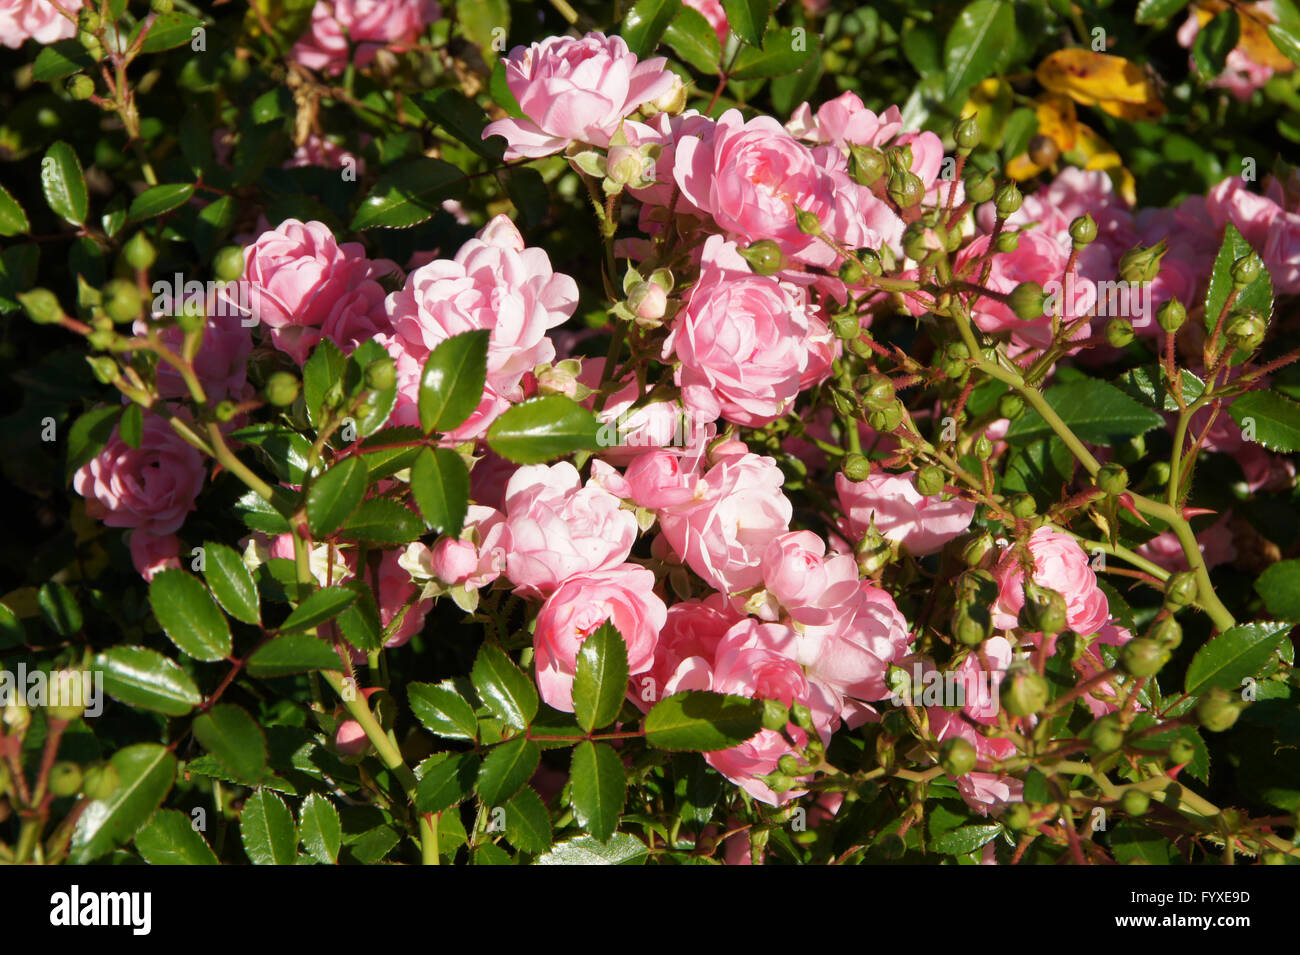 Bodendecker Rosen High Resolution Stock Photography and Images - Alamy